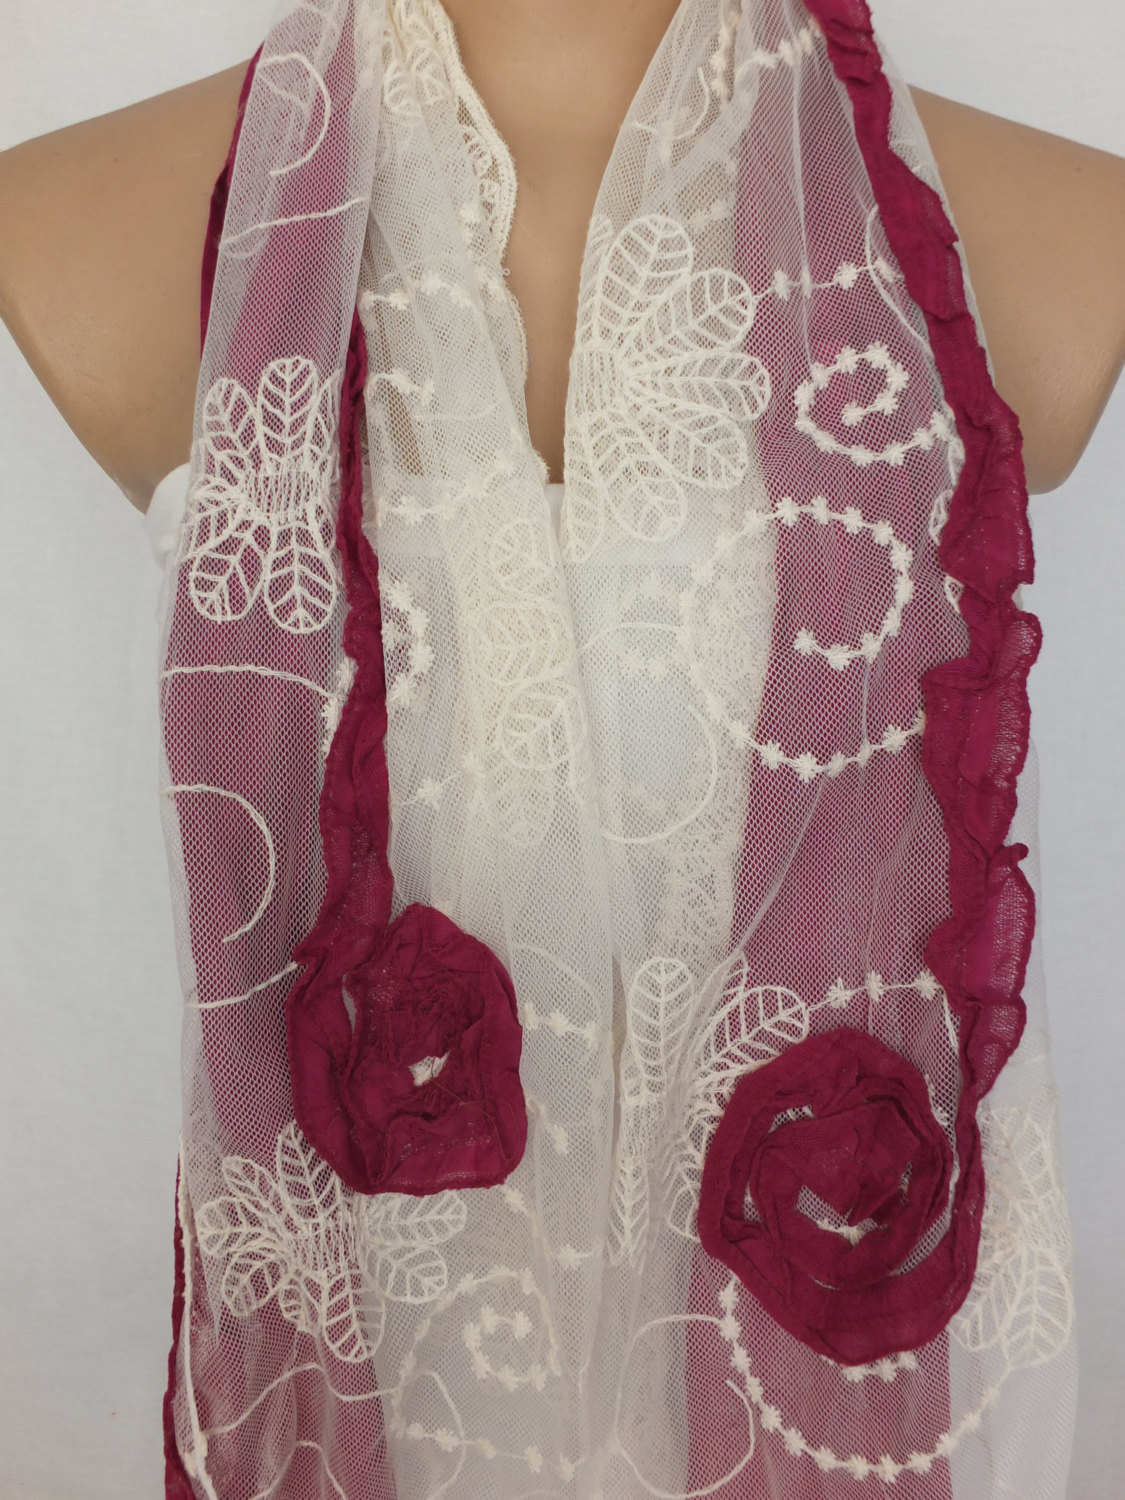 Burgundy Rose Scarf, Tulle And Cotton Scarf, Burgundy And Cream Shawl, Long Scarf Shawl, Lace Cowl, Gift For Her